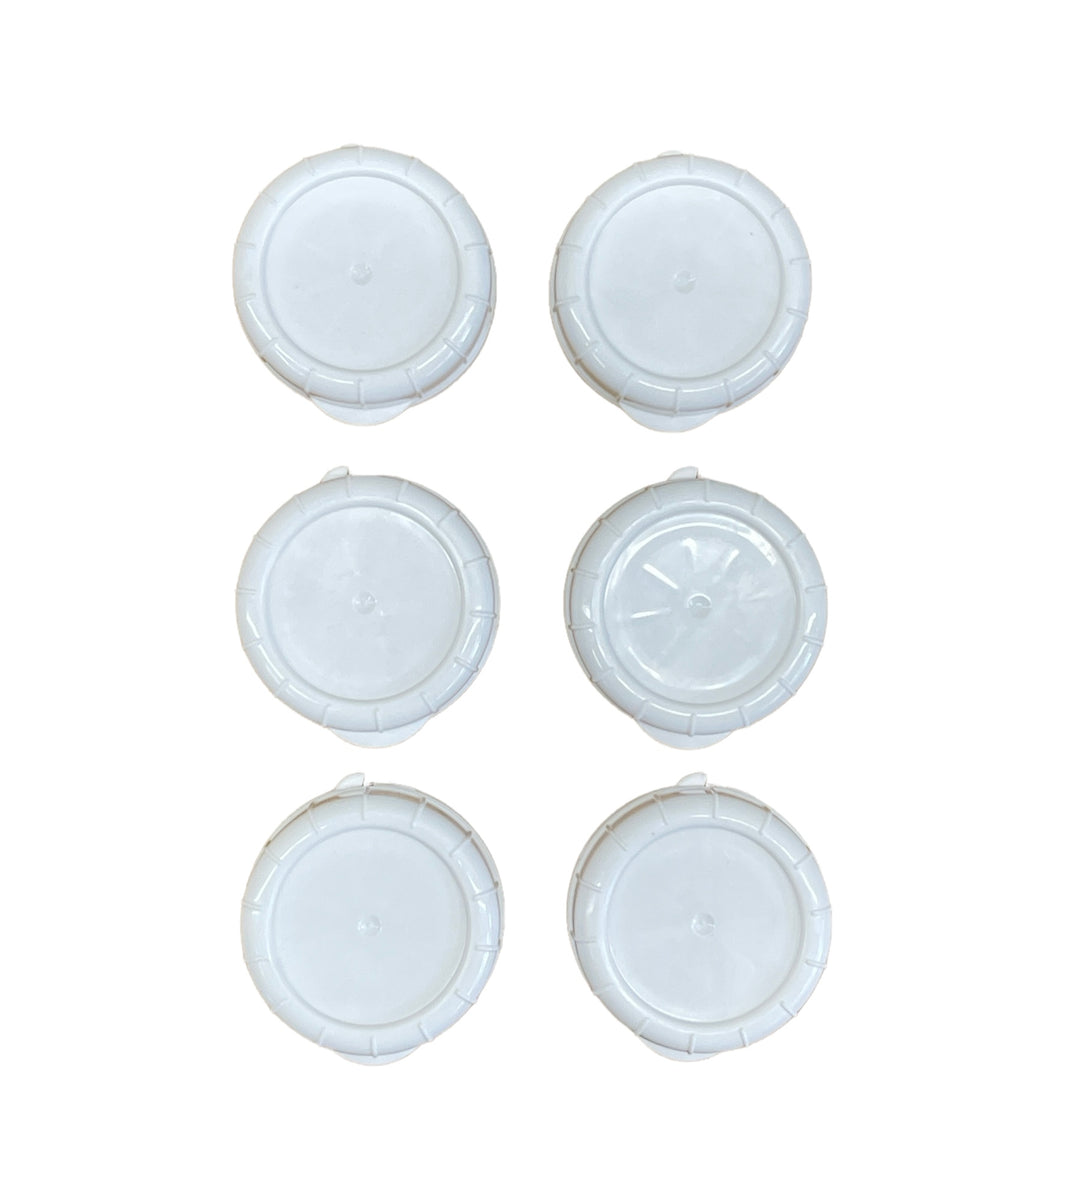 6 Pack Glass Bottle Replacement Caps with Tampered Evident Seal, 48mm Diameter Bottle Lids - Hastingsville